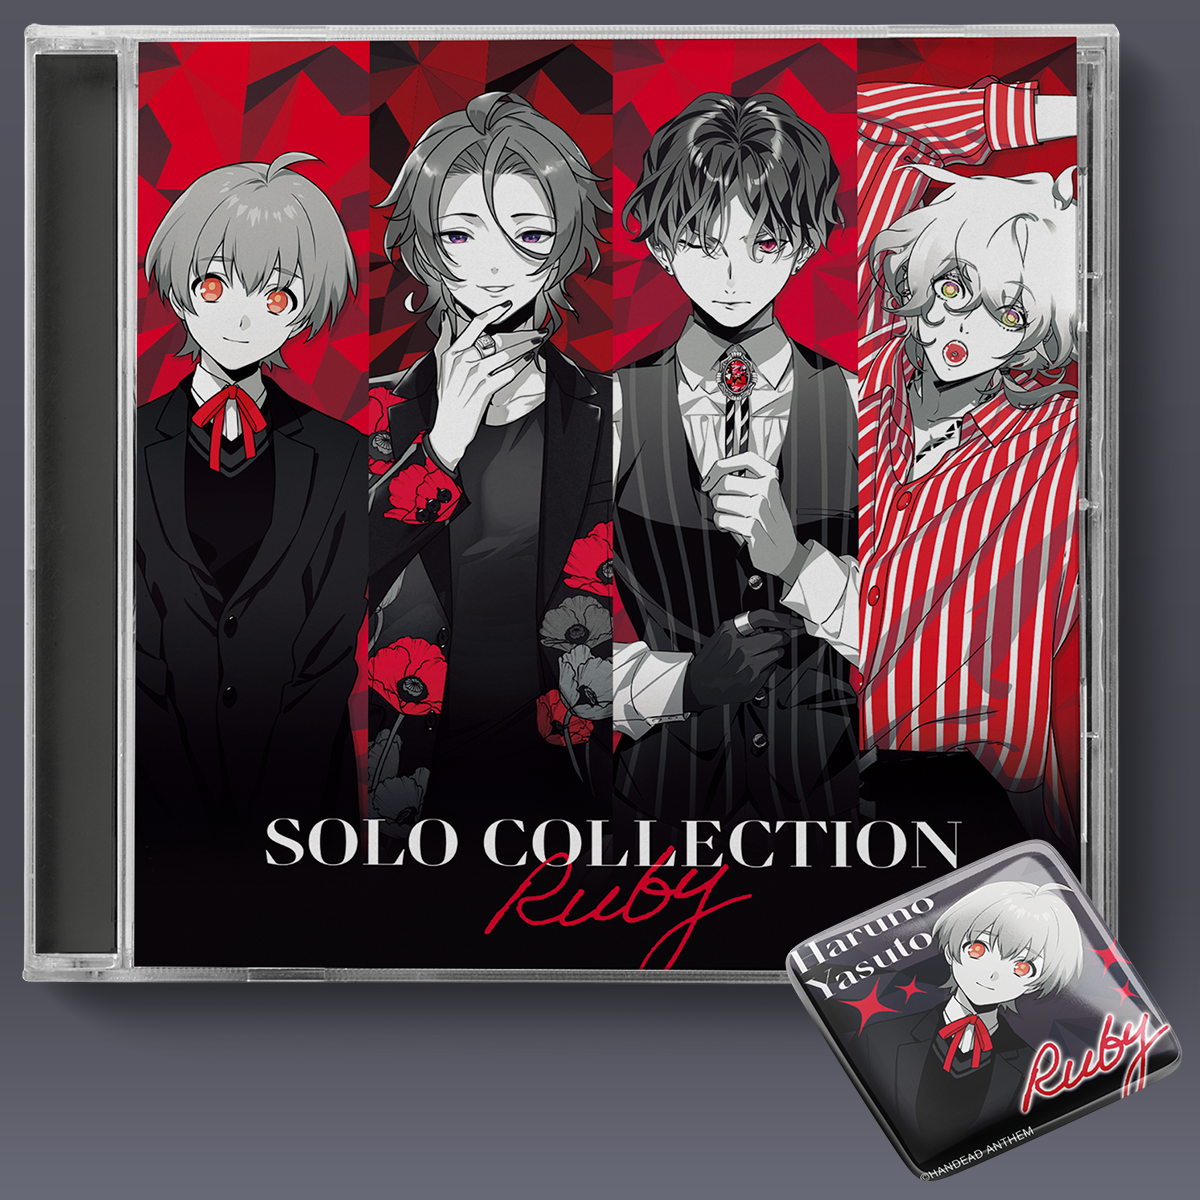 SOLO COLLECTION Ruby – Nizistore ニジストア